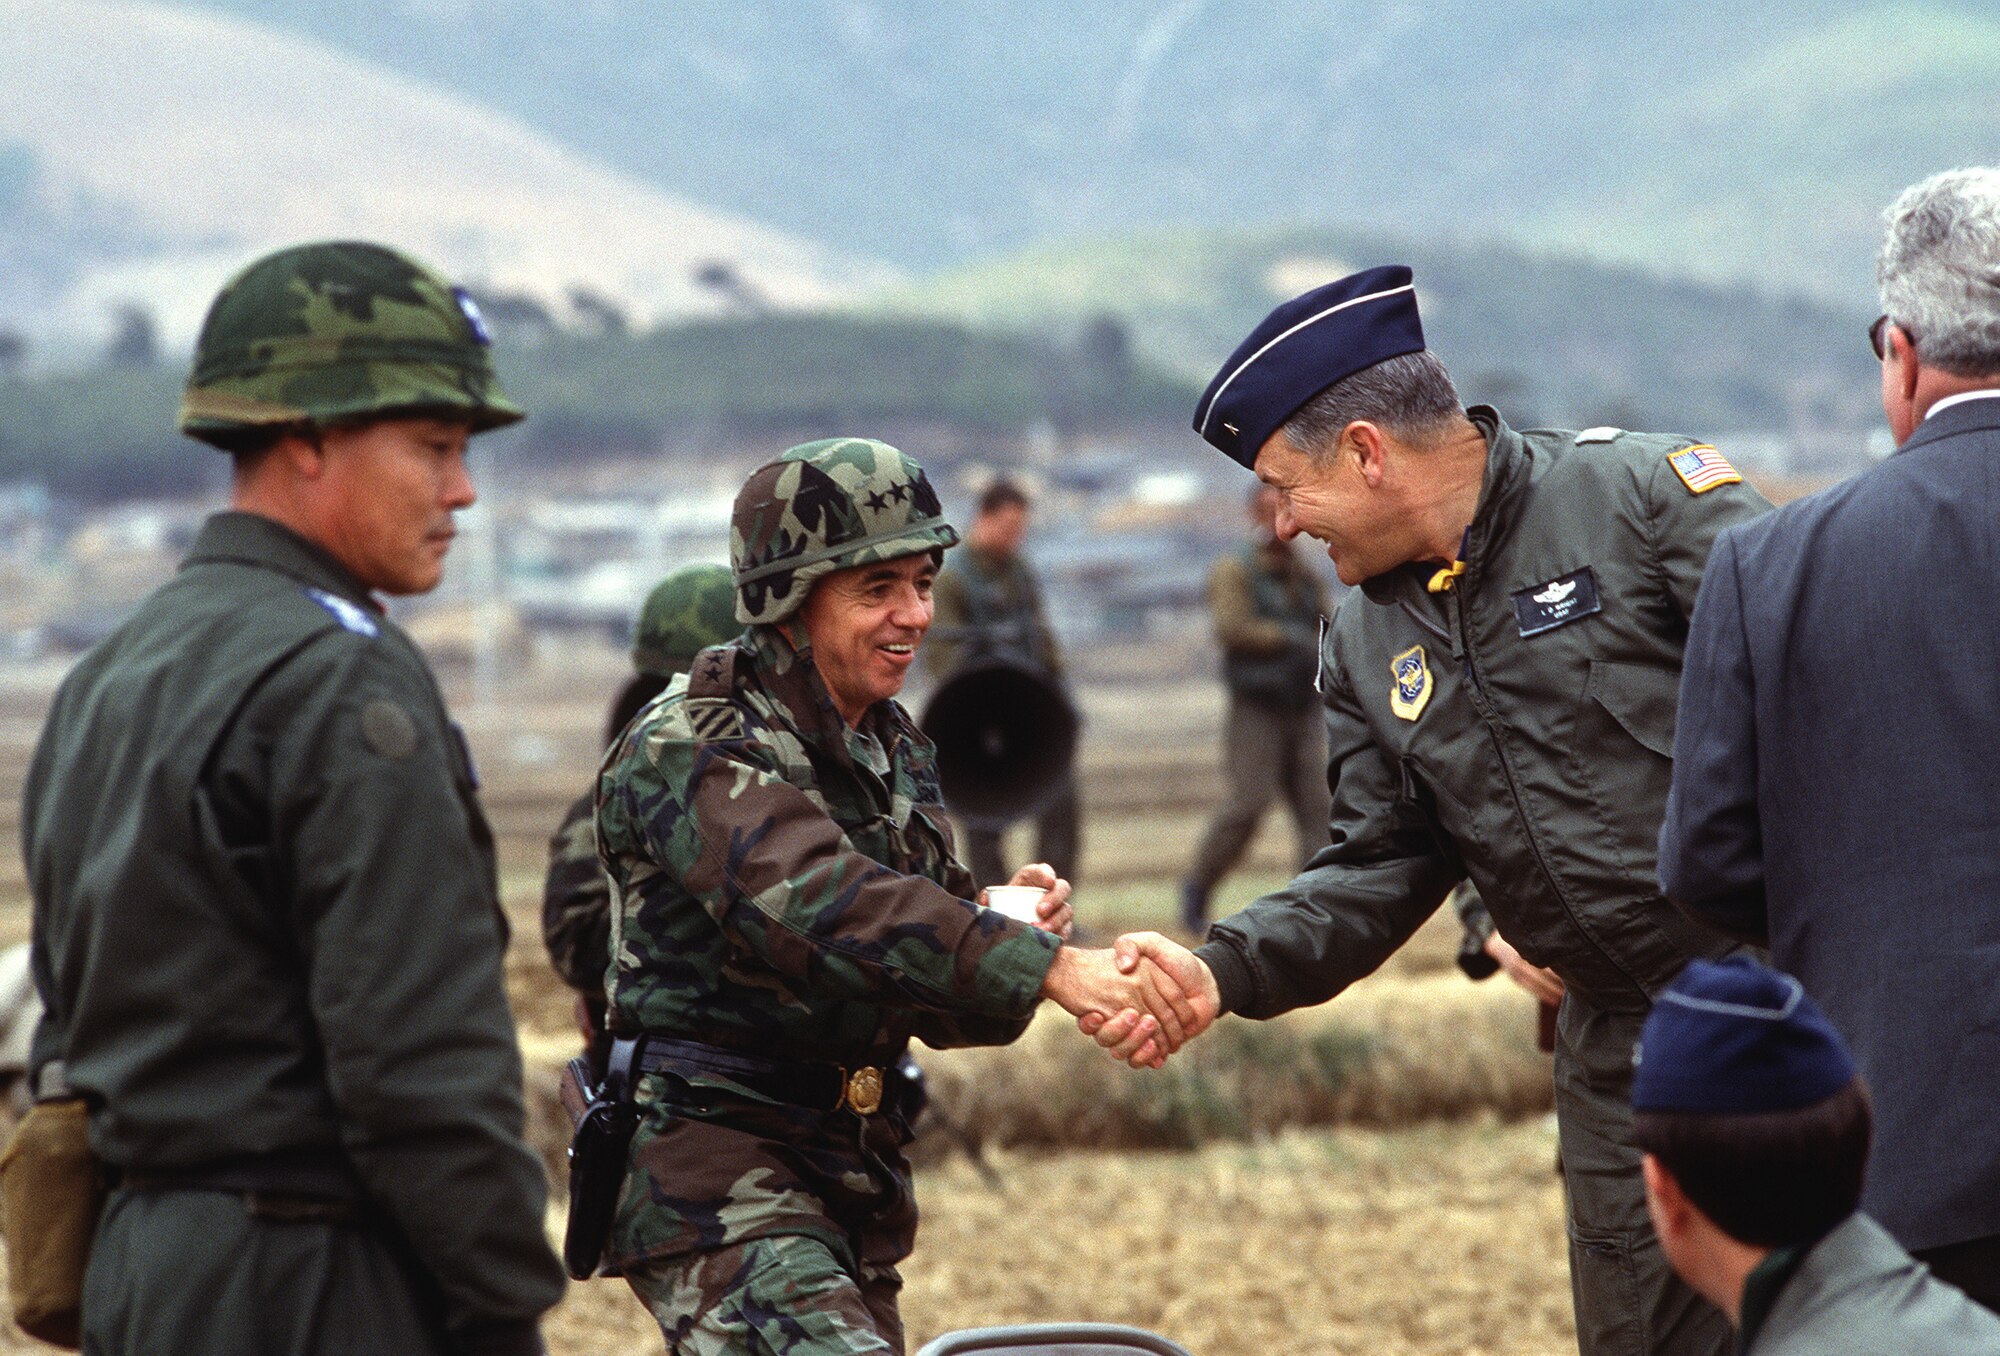 High ranking military men shake hands in a field surrounded by other military members.